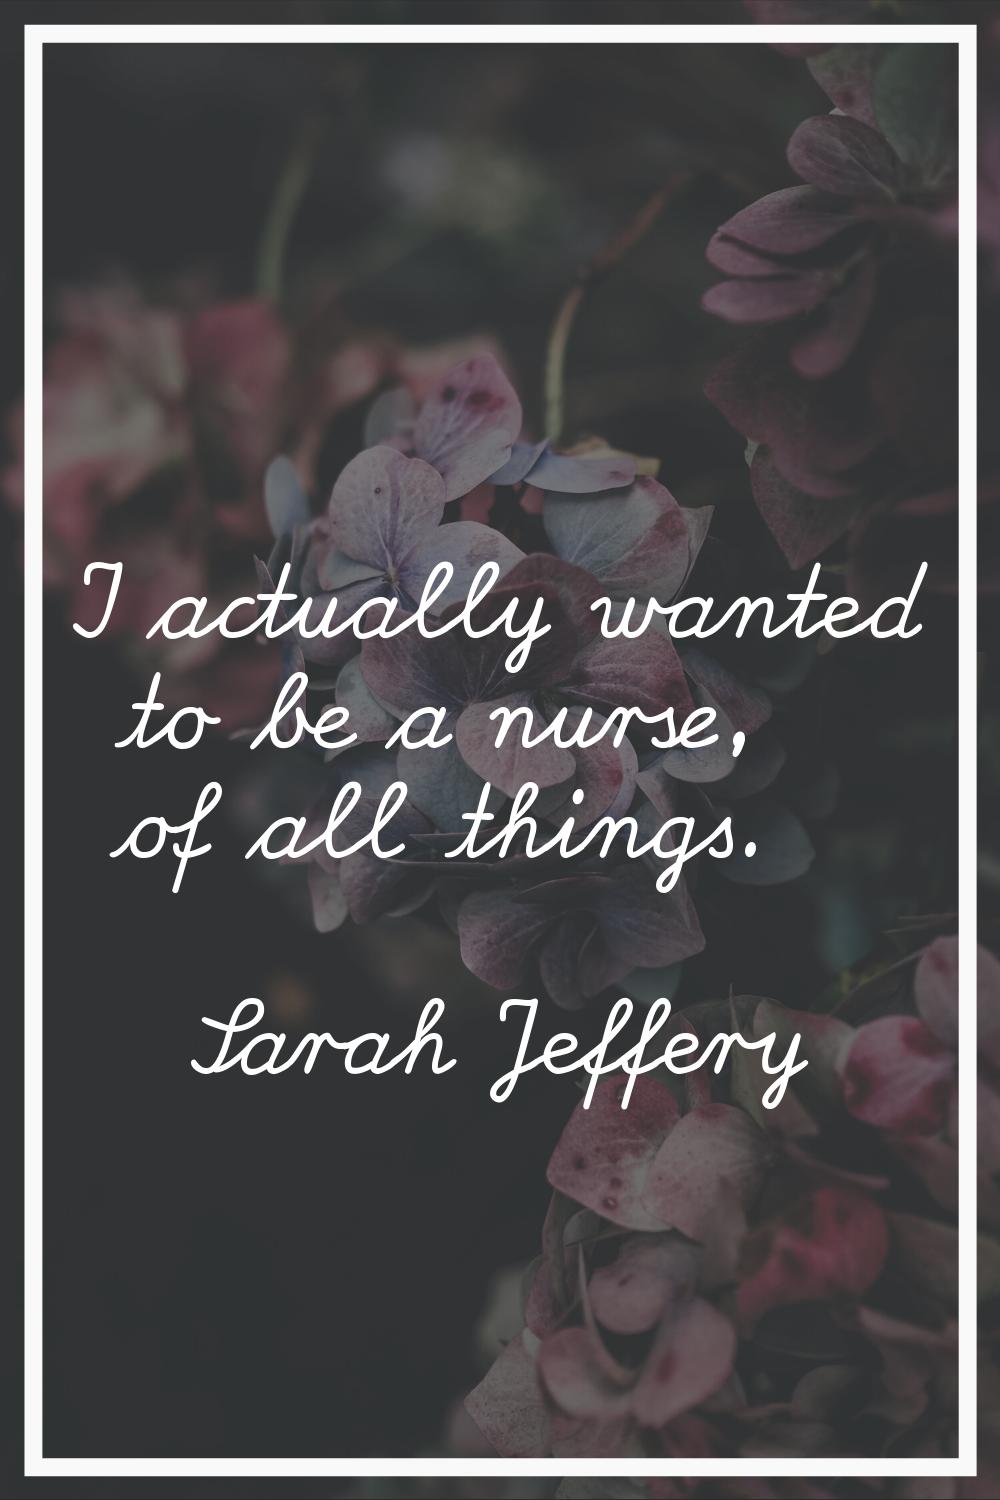 I actually wanted to be a nurse, of all things.